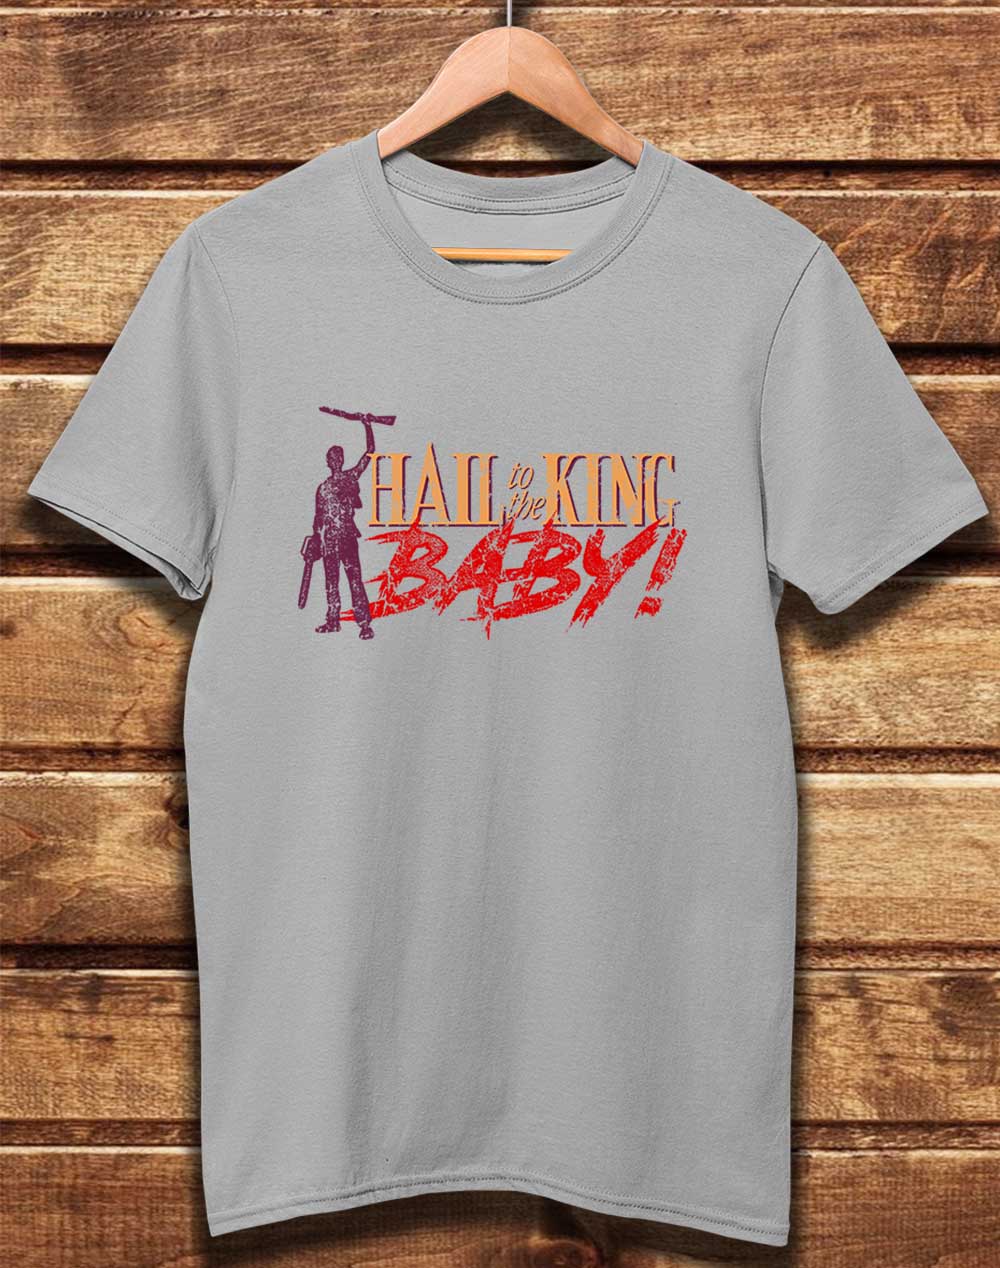 Light Grey - DELUXE Hail to the King Baby Organic Cotton T-Shirt